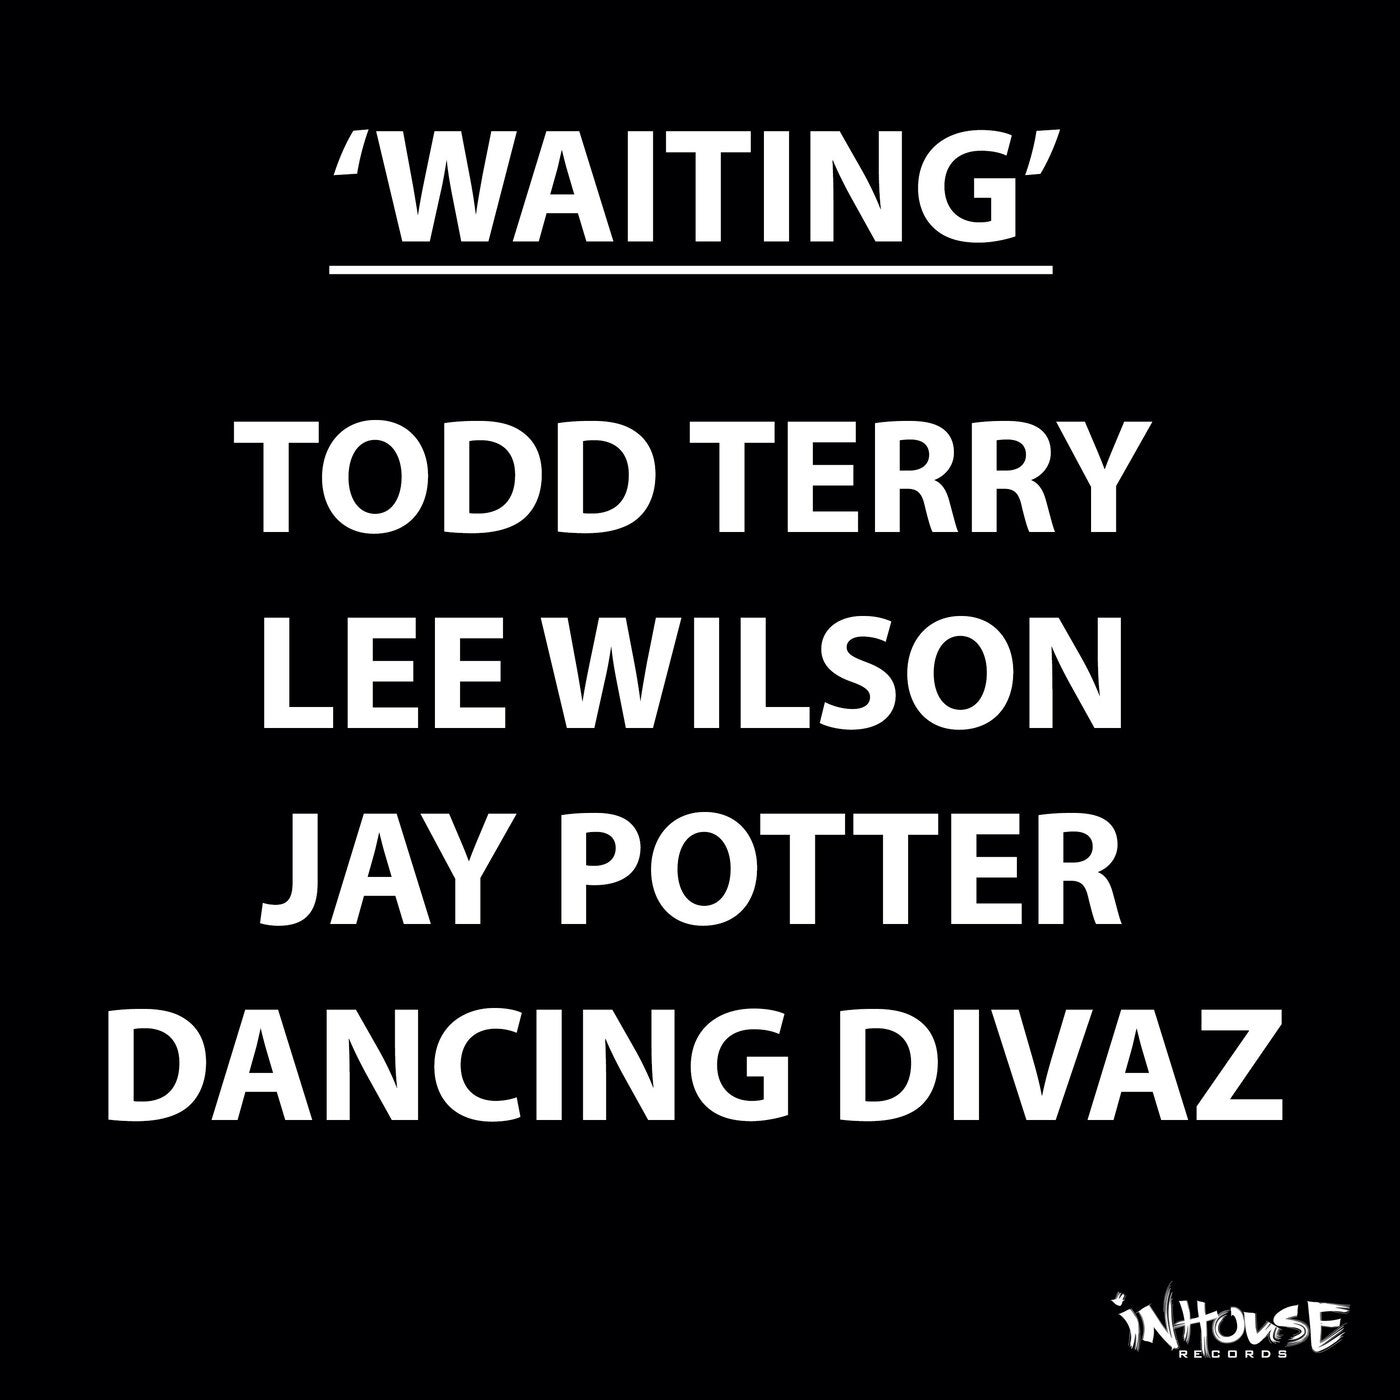 Todd Terry, Dancing Divaz, Lee Wilson, Jay Potter – Waiting [INHR765]